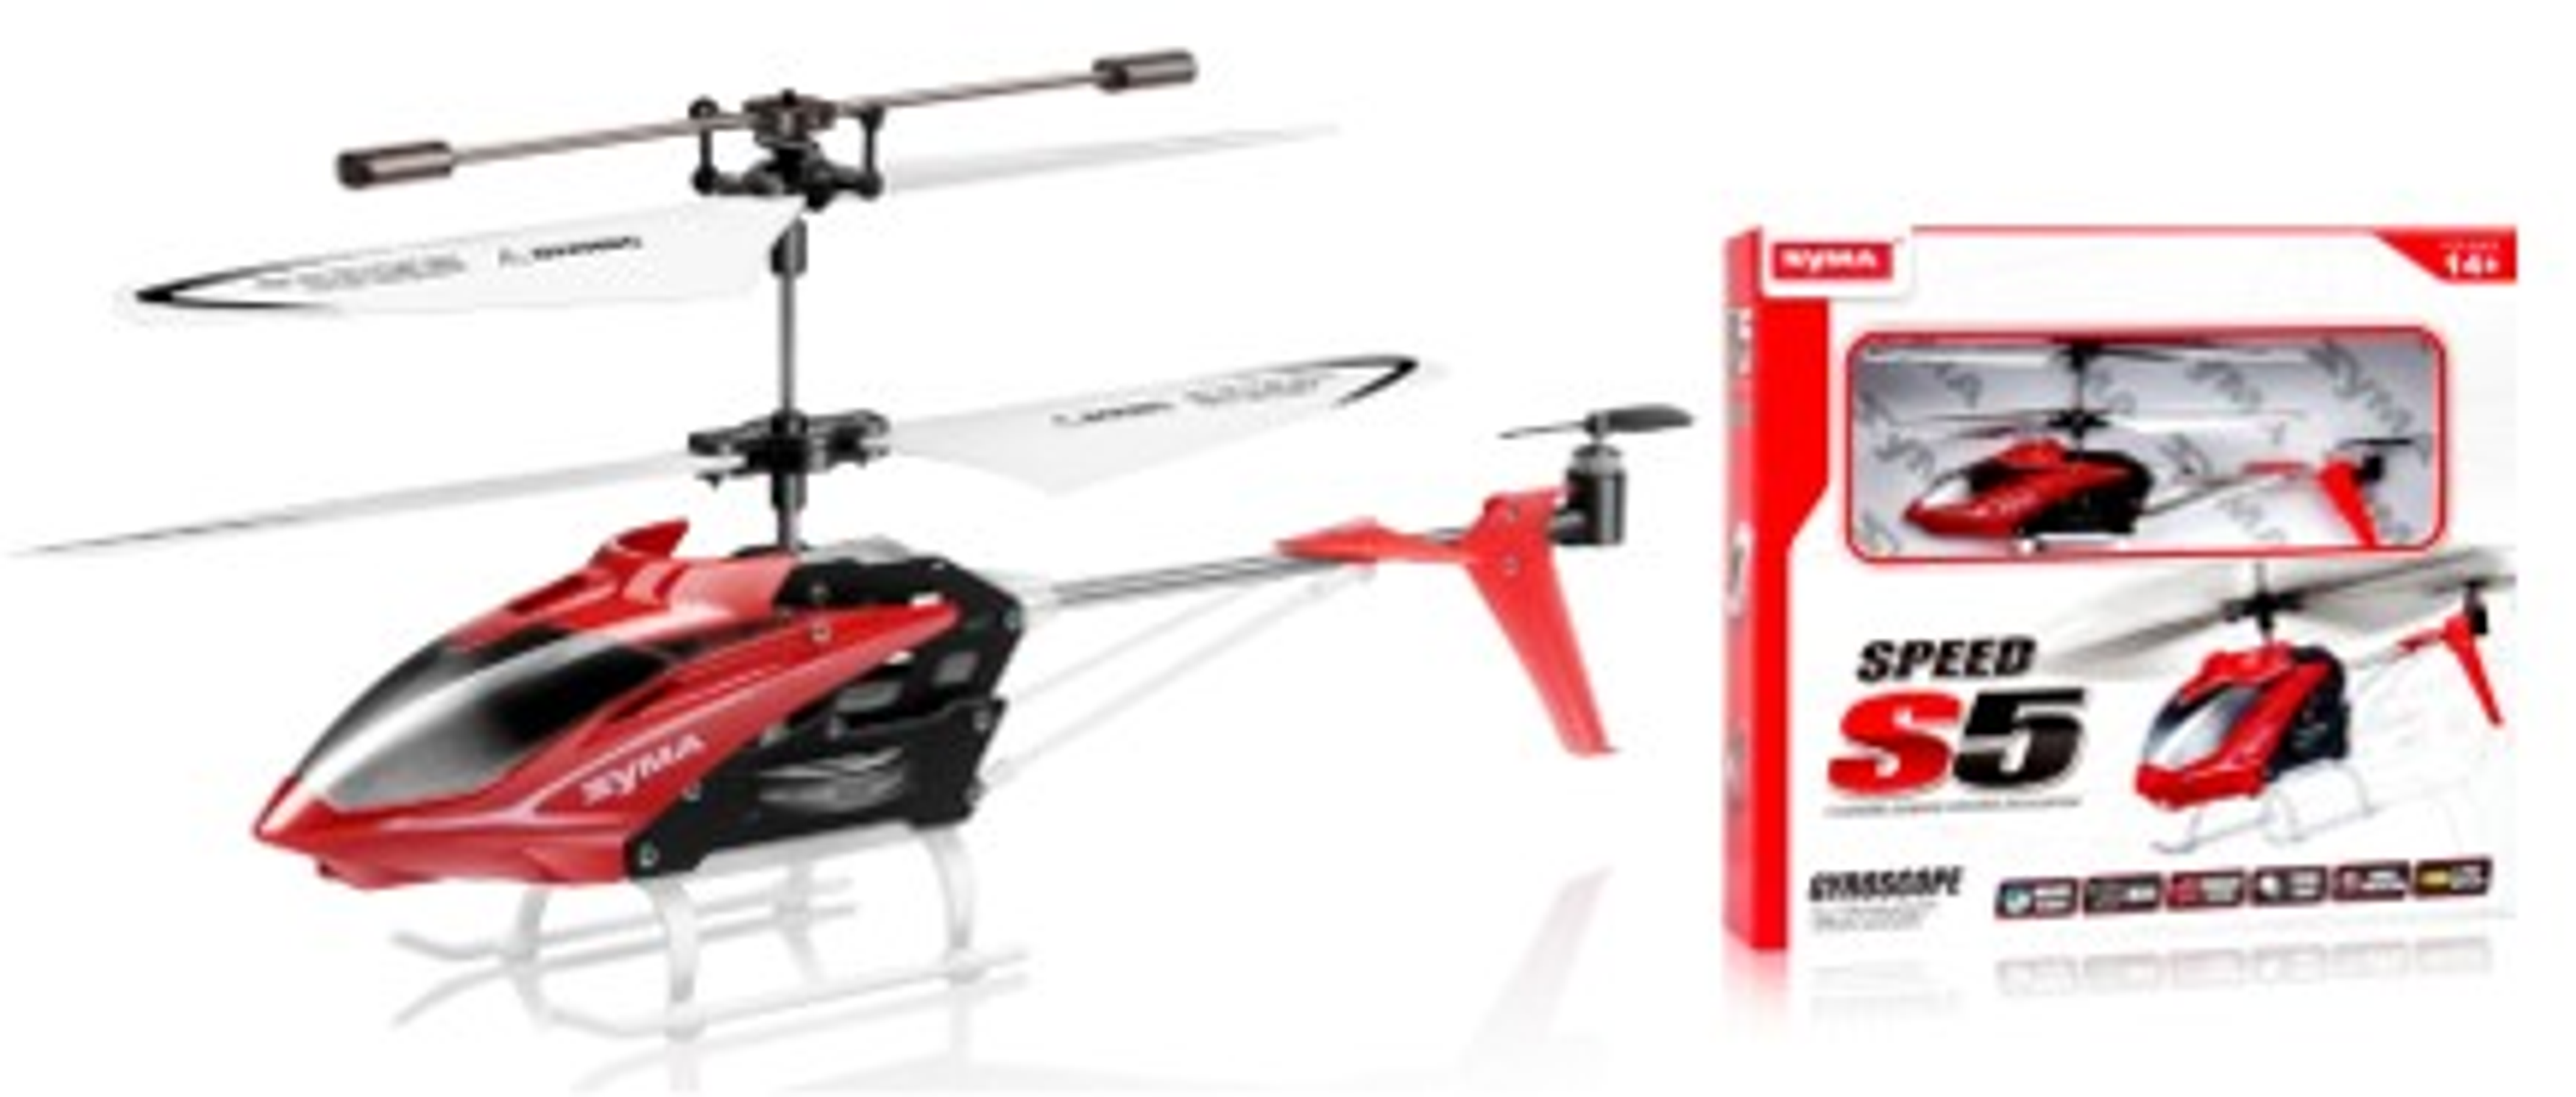 Syma - I/R S5 Speed Helicopter Red (50400) - Leker